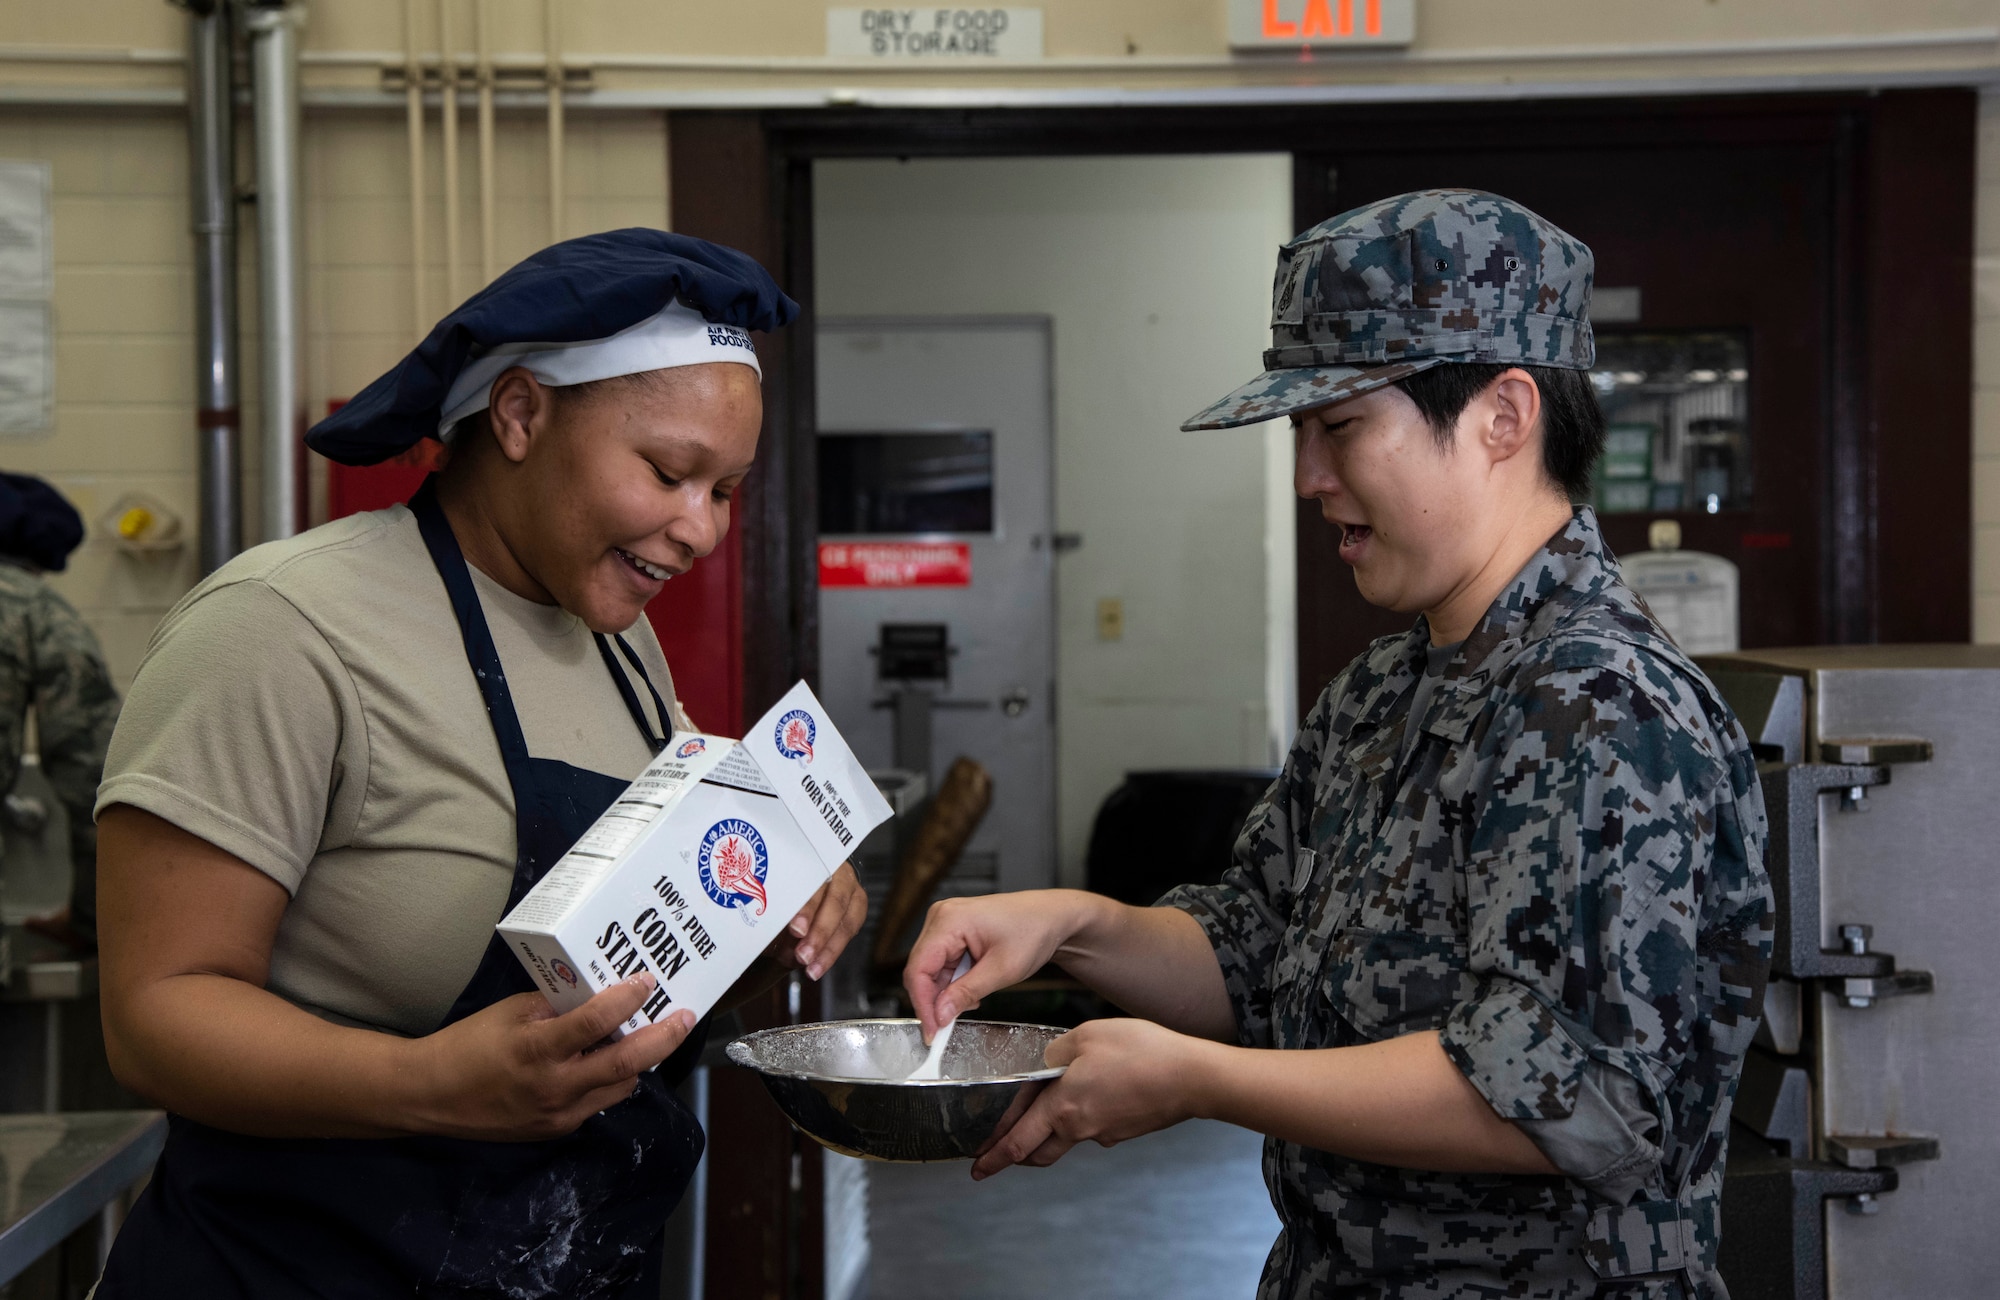 U.S. Air Force Airman 1st Class Ty’Lacia Berard, a 35th Force Support Squadron food specialist, helps Japan Air Self-Defense Force Tech. Sgt. Tomoyo Kato, a 27th Aircraft Control and Warning Squadron nutritionist, create a corn starch mix during a Bilateral Exchange Program visit at Misawa Air Base, Japan, Sept. 21, 2018. Kato learned how to make larger portions of meals for thousands of Airmen, whereas she normally only makes meals for approximately 300 personnel at her unit. (U.S. Air Force  photo by Senior Airman Sadie Colbert)